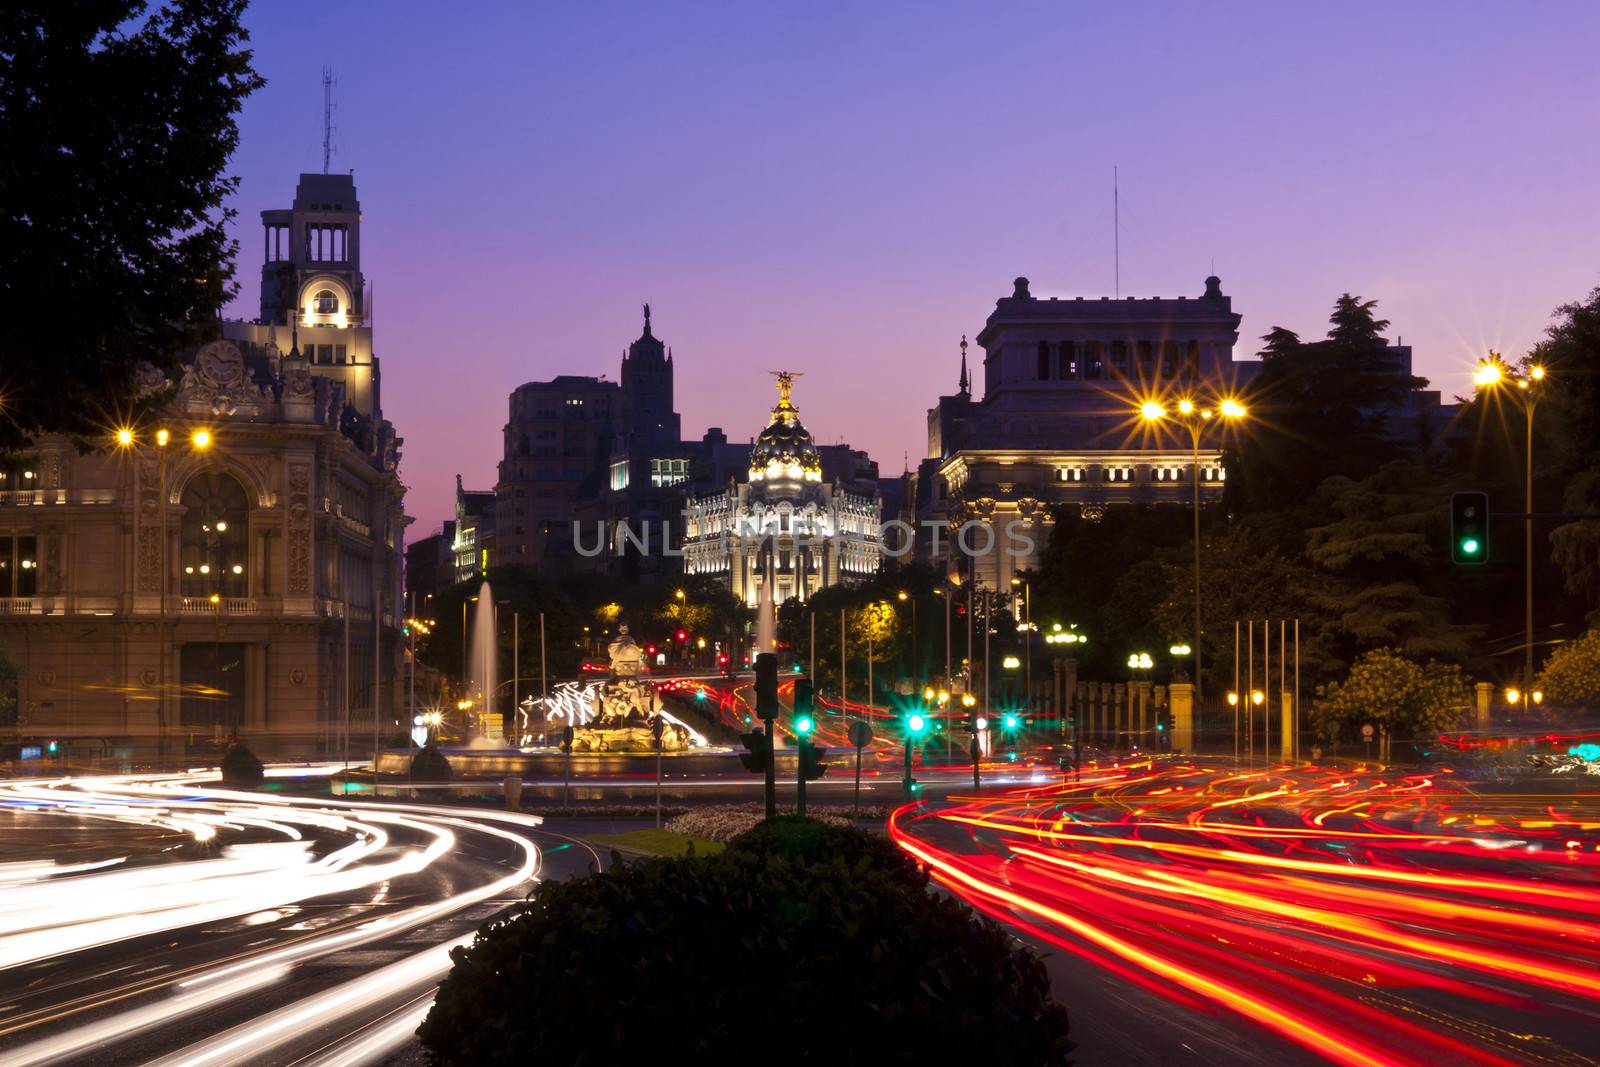 Rays of traffic lights on Calle de Alcala street and Cibeles square in Madrid at night. Spain.